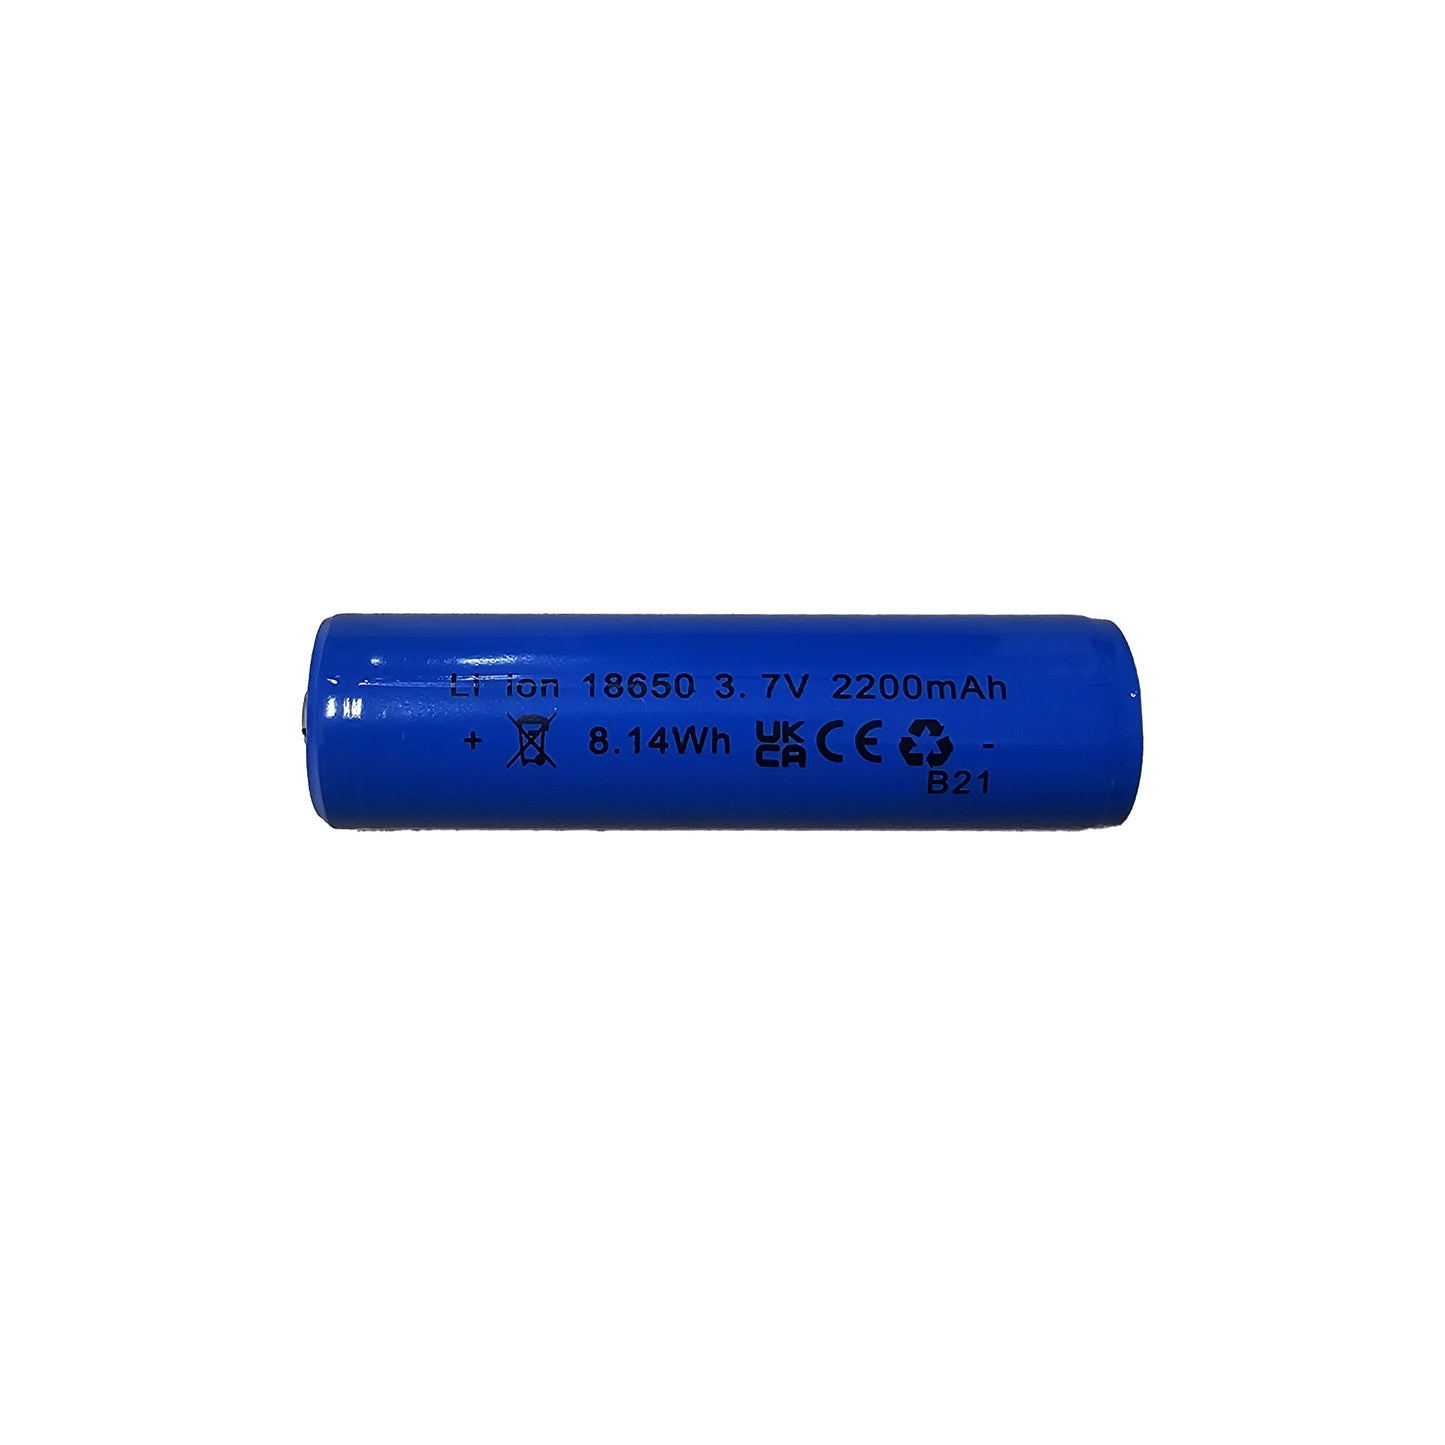 B21 -  Li-ion battery for multiple products - click to see list